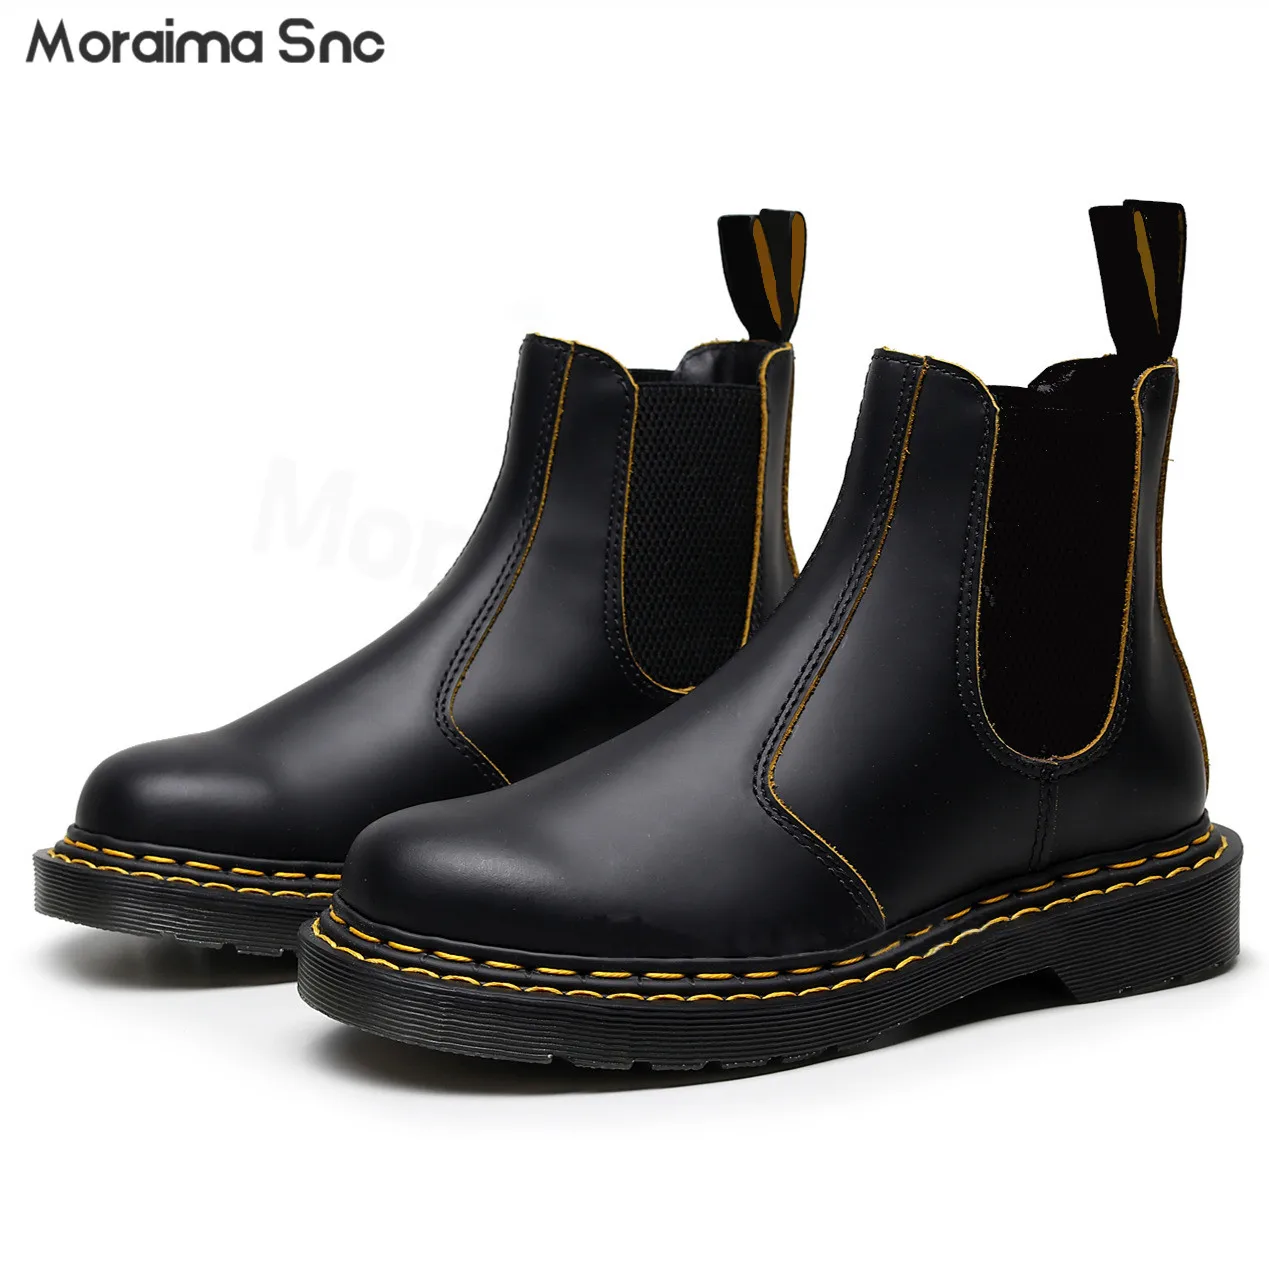 

Yellow Double Line Chelsea Boots Personalized Round Toe Elastic Slip-On Casual Shoes Large Size Fashionable Women's Boots